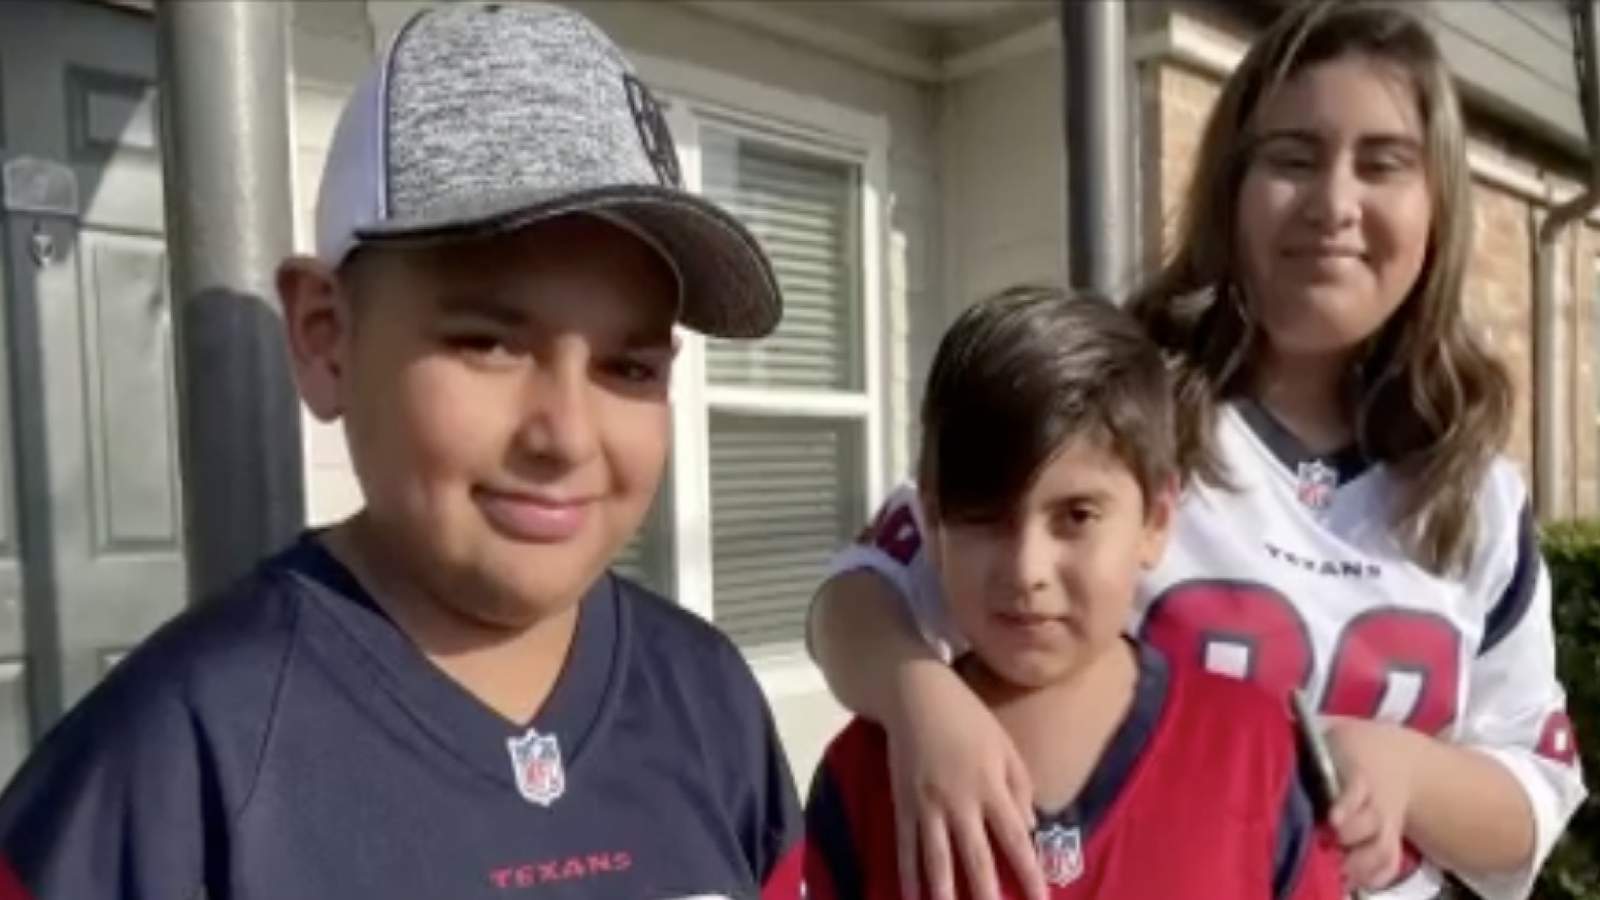 JJ Watt, Texans give sweet surprise to kids who tragically lost father in wreck